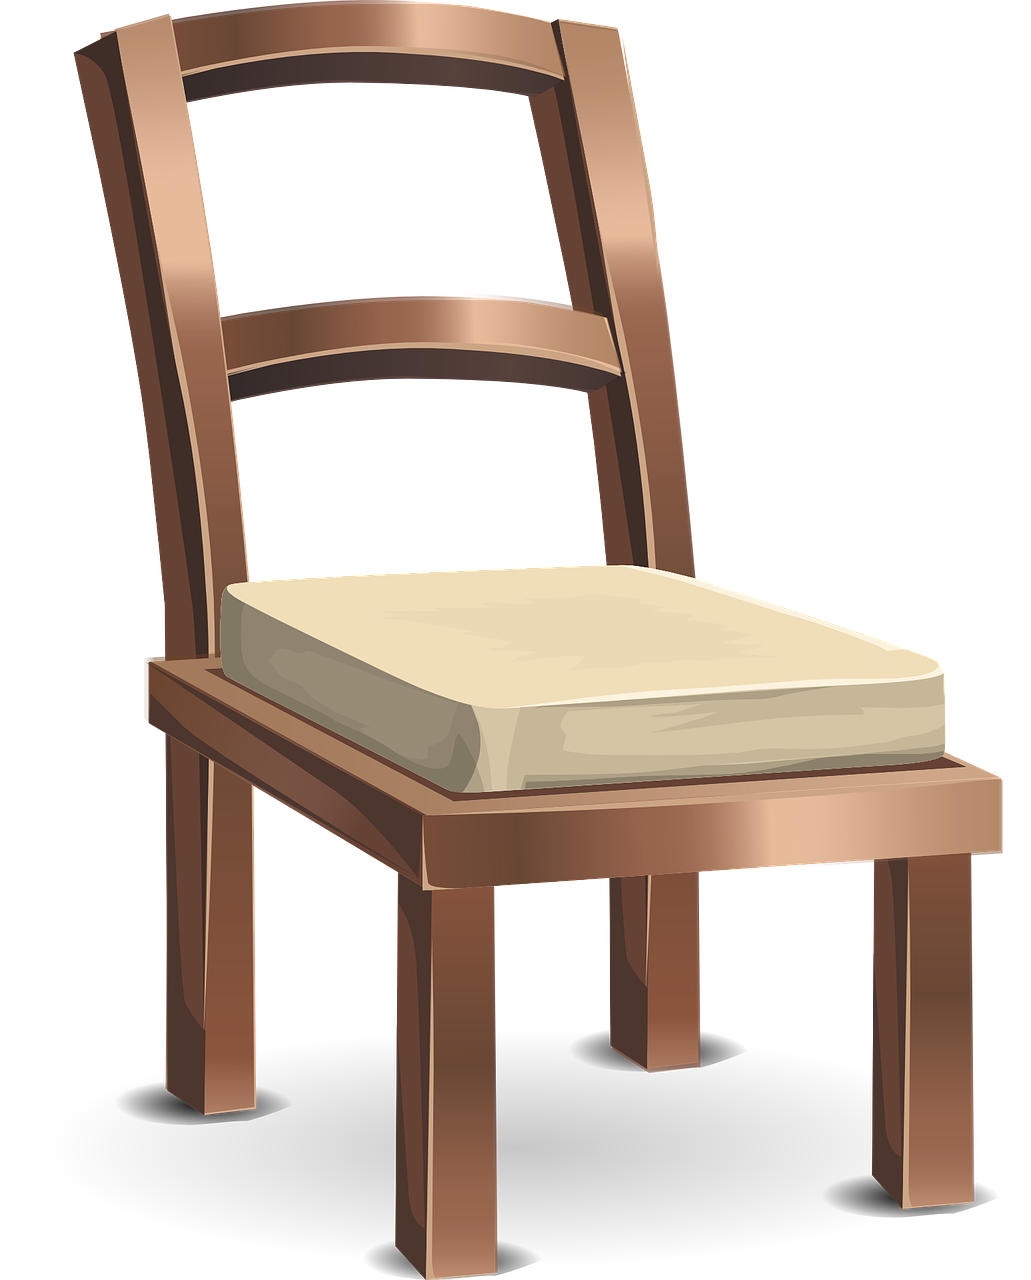 wooden chairs furniture free photo